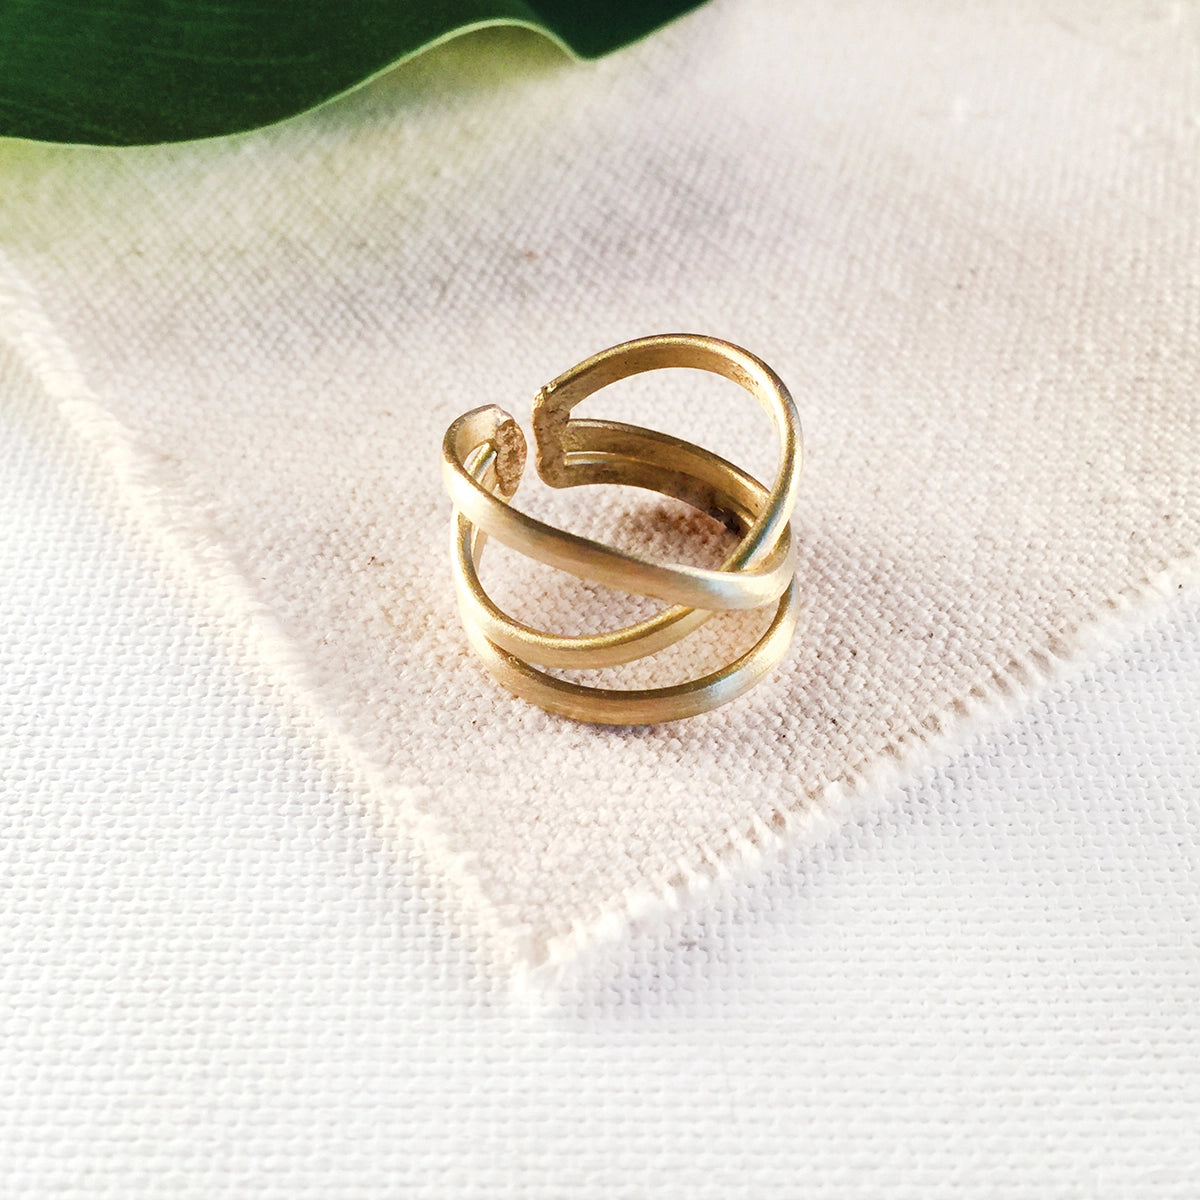 Linear X Ring - gold tone